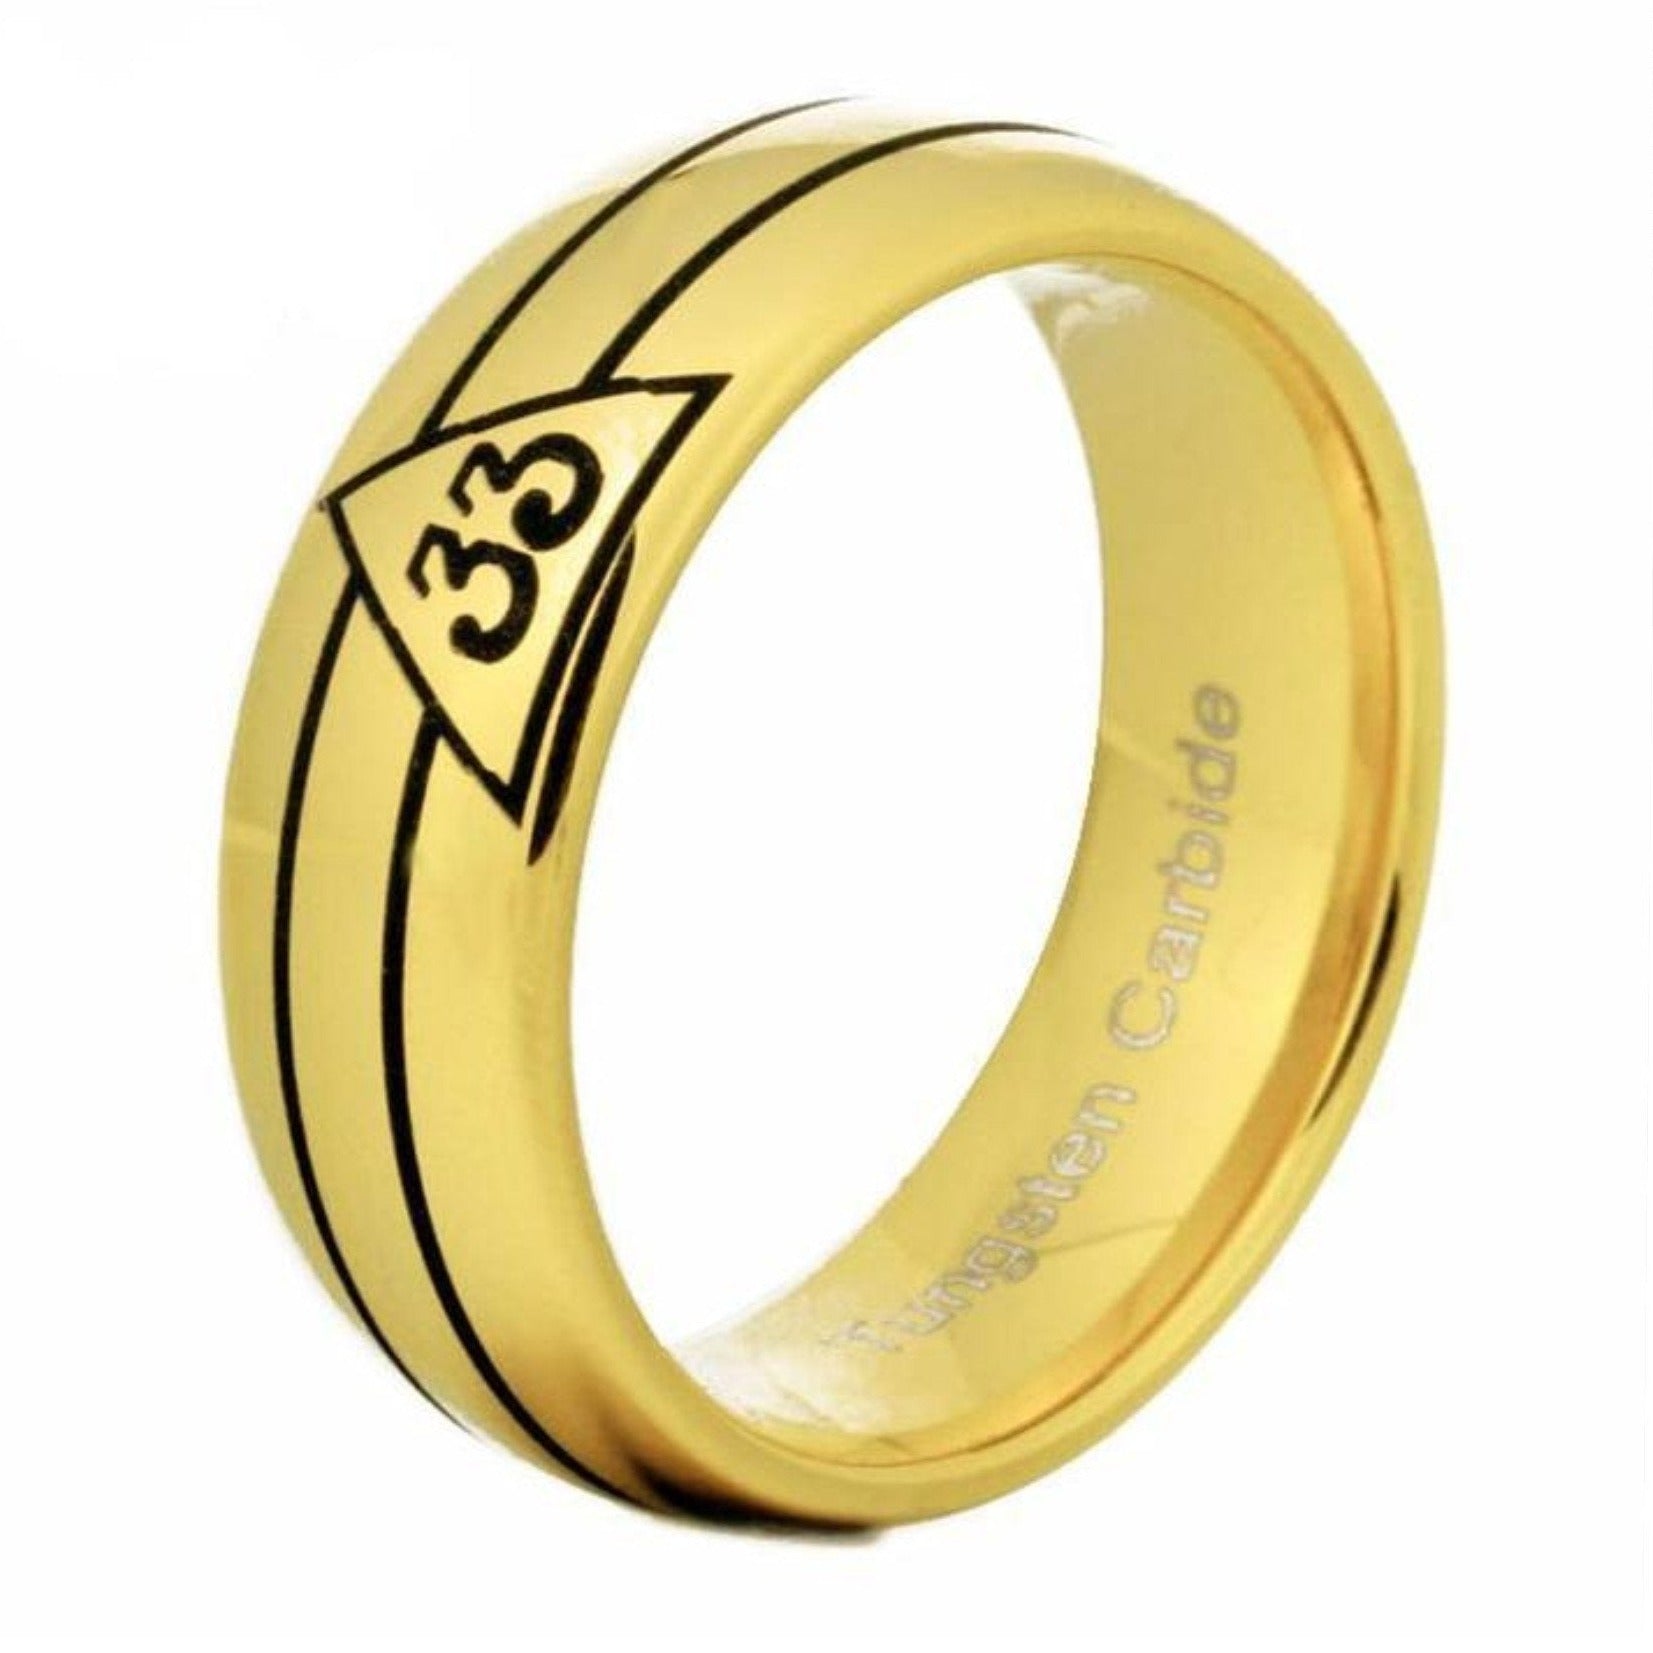 33rd Degree Scottish Rite Ring - Gold Rounded Tungsten Personali